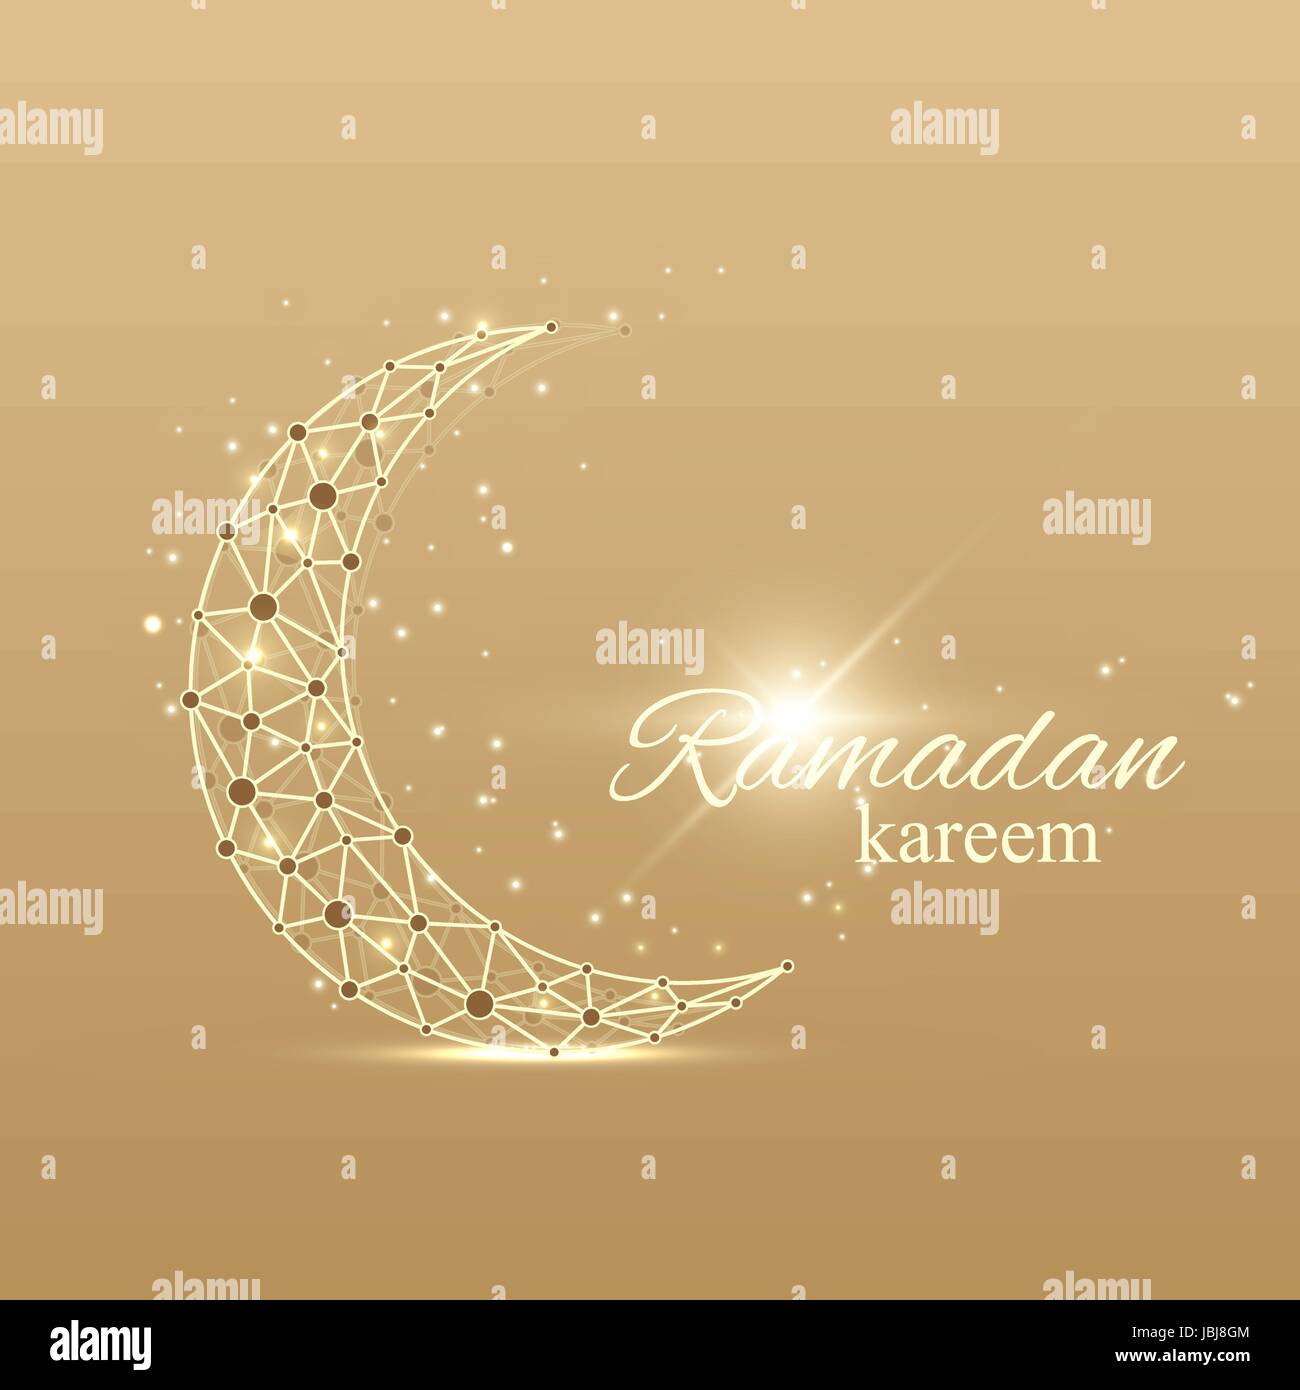 Ramadan Kareem text greetings background. Golden moon made from connected line and dots.Golden background with mandala decoration. Eid Mubarak celebration. Vector illustration. Stock Vector